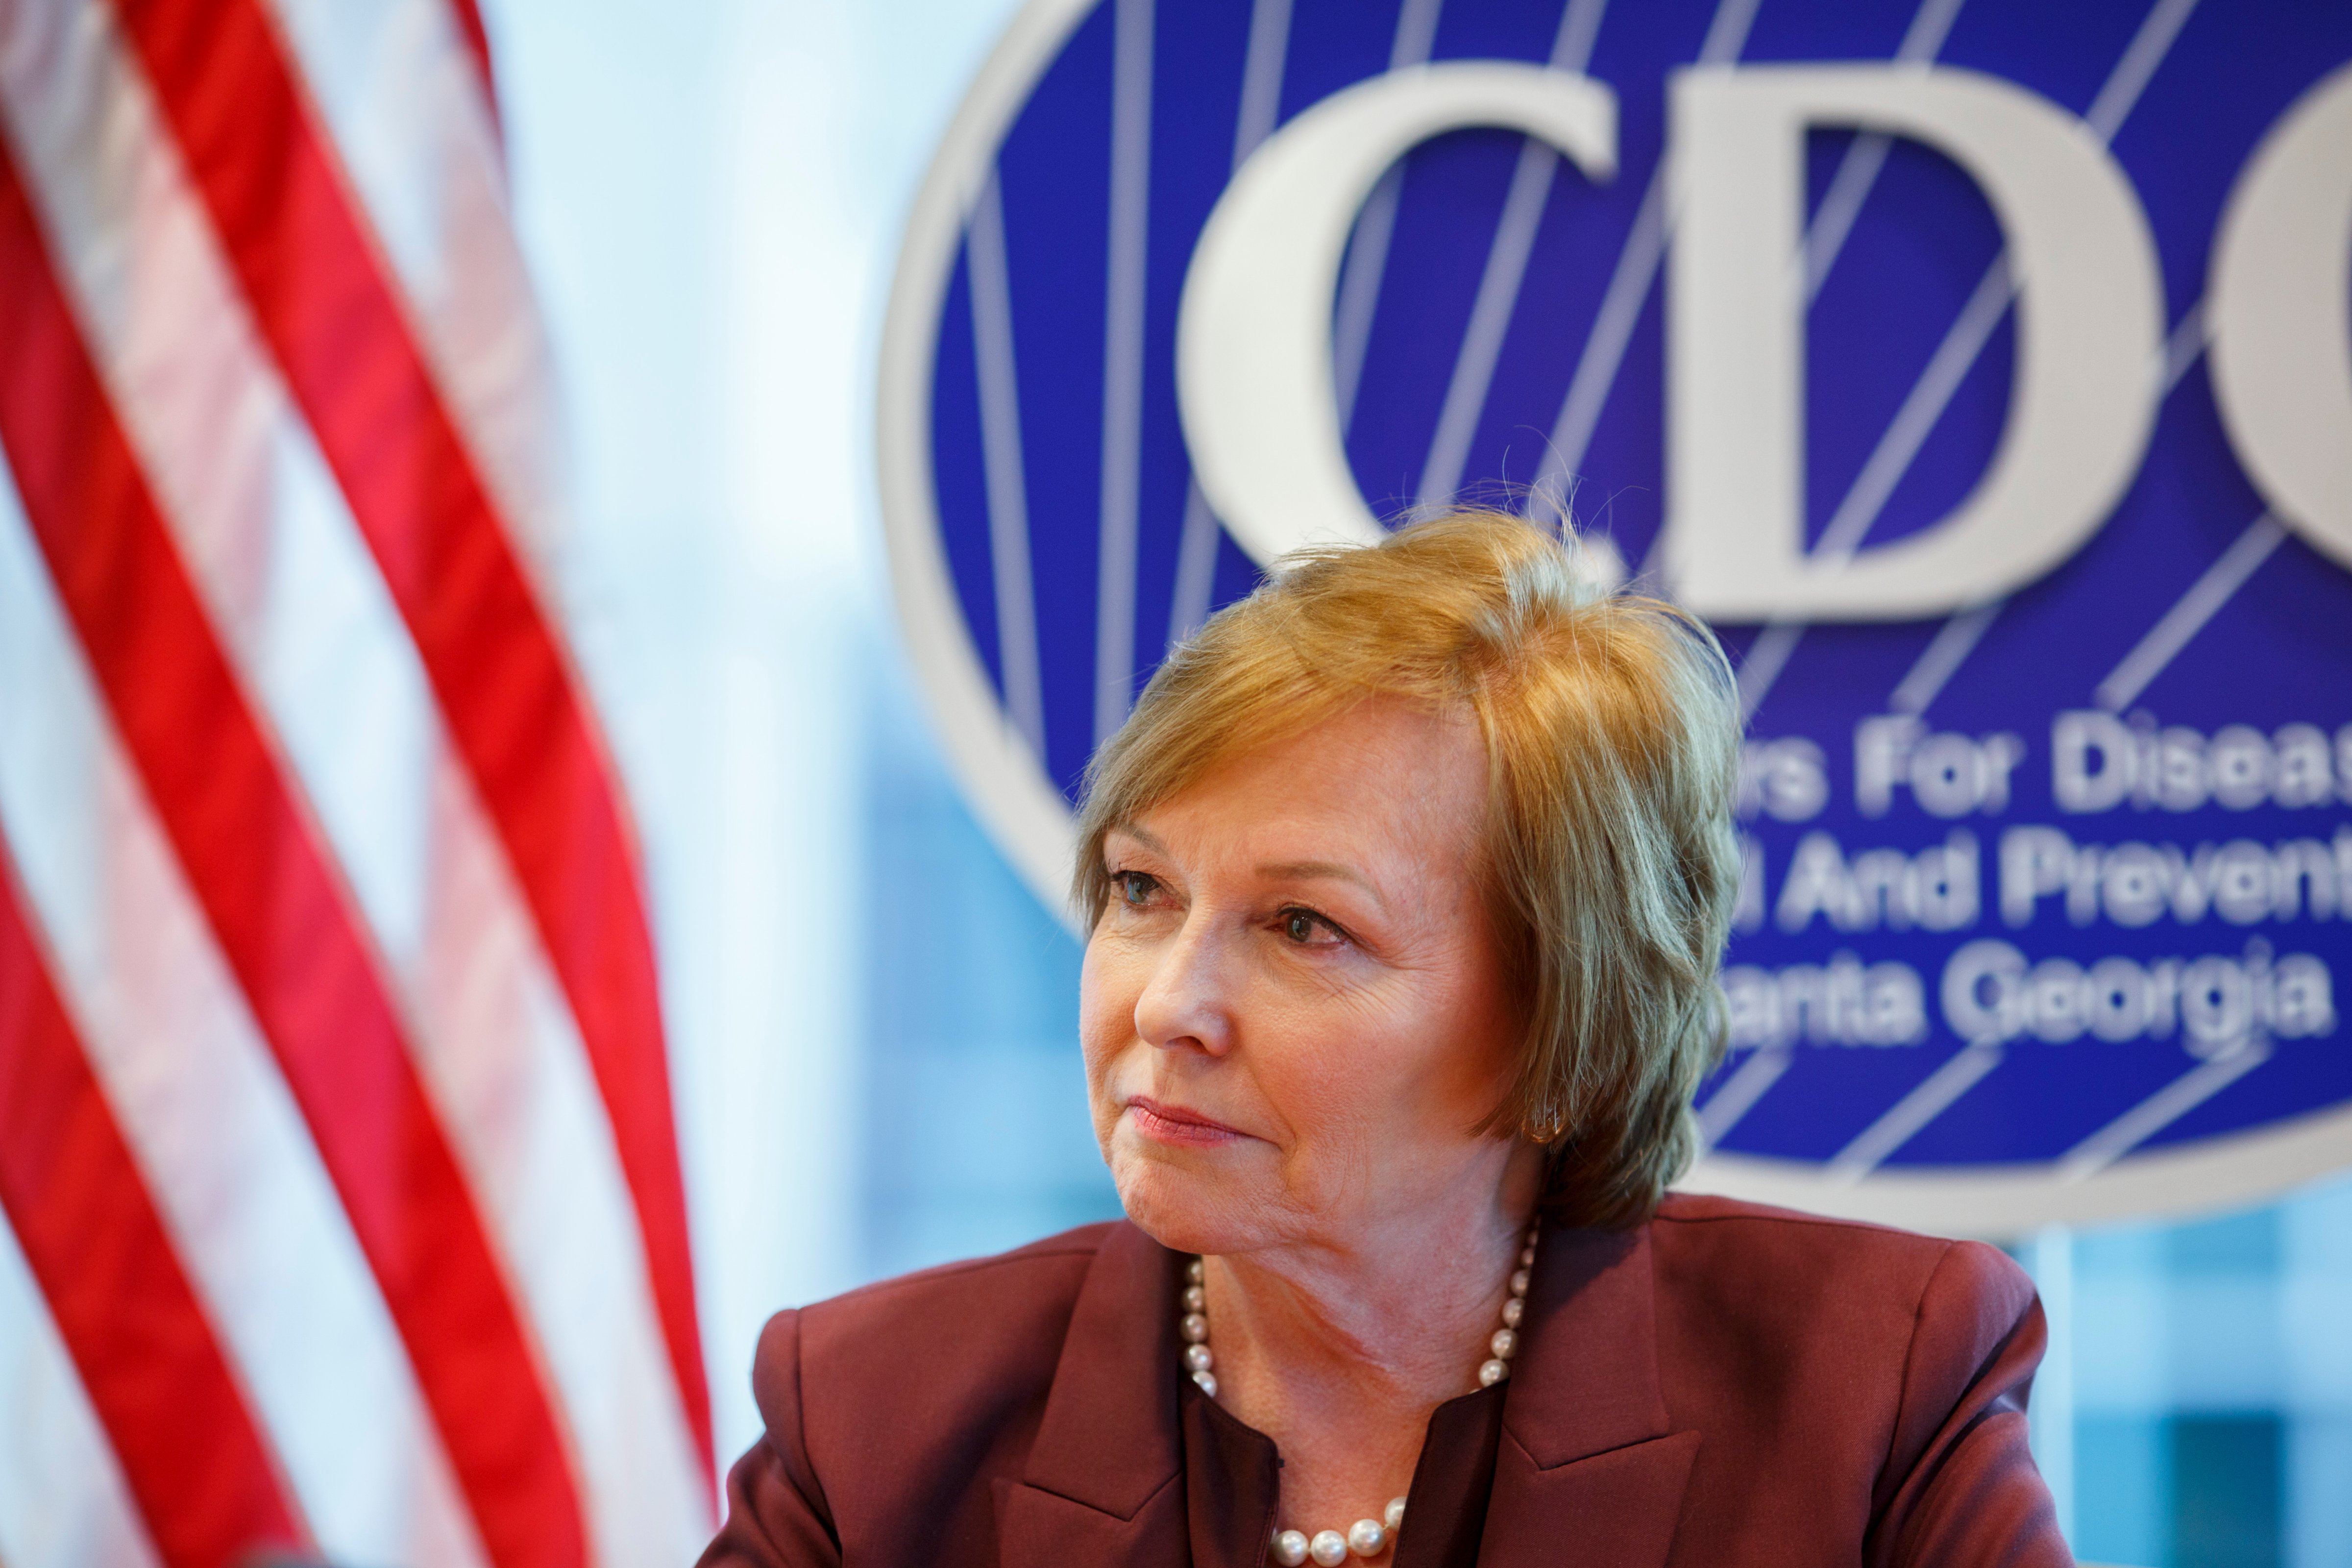 Former Centers for Disease Control and Prevention Director Dr. Brenda Fitzgerald (The Washington Post&mdash;The Washington Post/Getty Images)